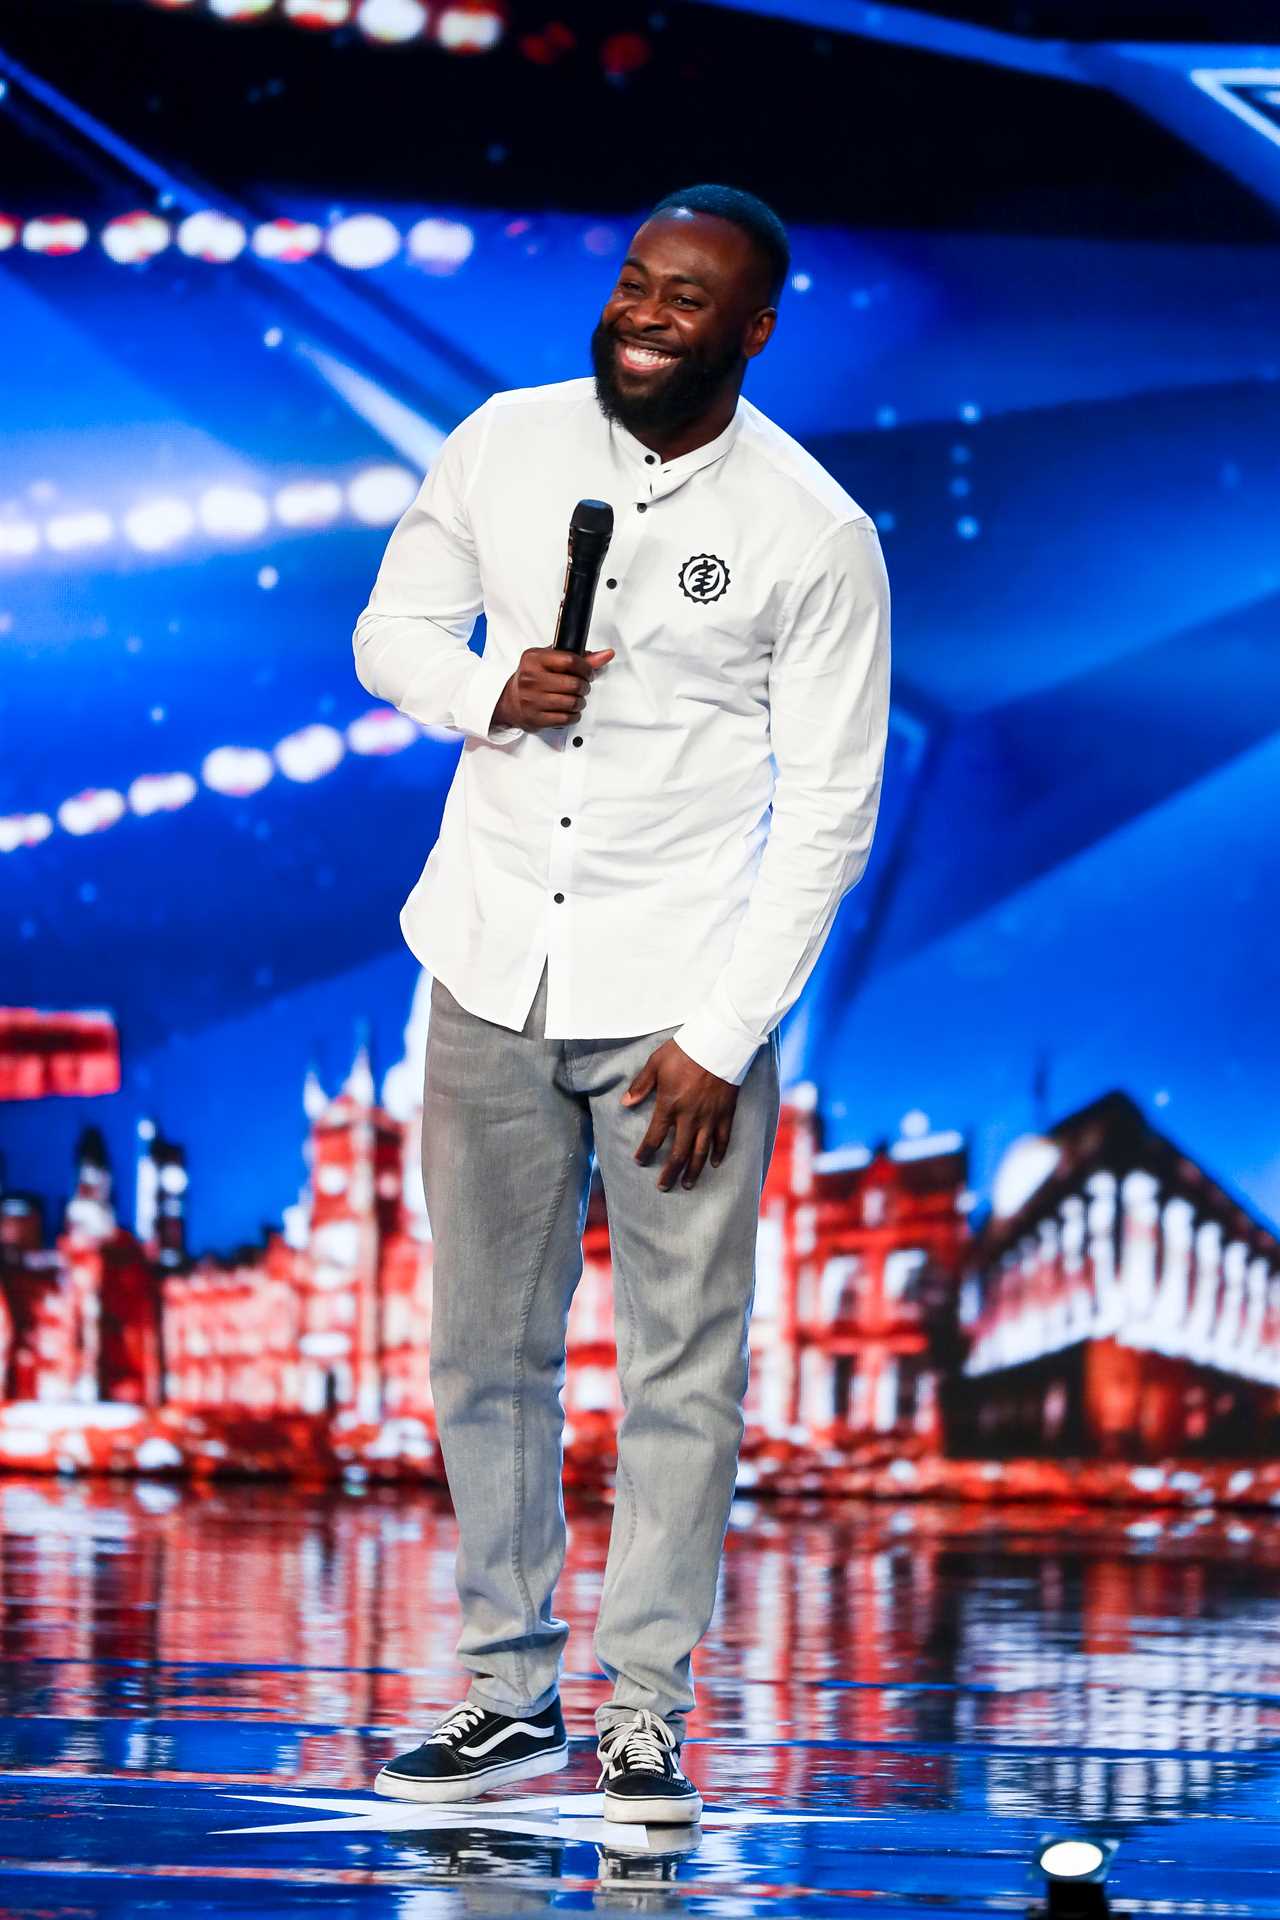 Britain’s Got Talent star Kojo Anim reveals Kevin Hart saved his career during crippling depression and anxiety after 20-year struggle for fame